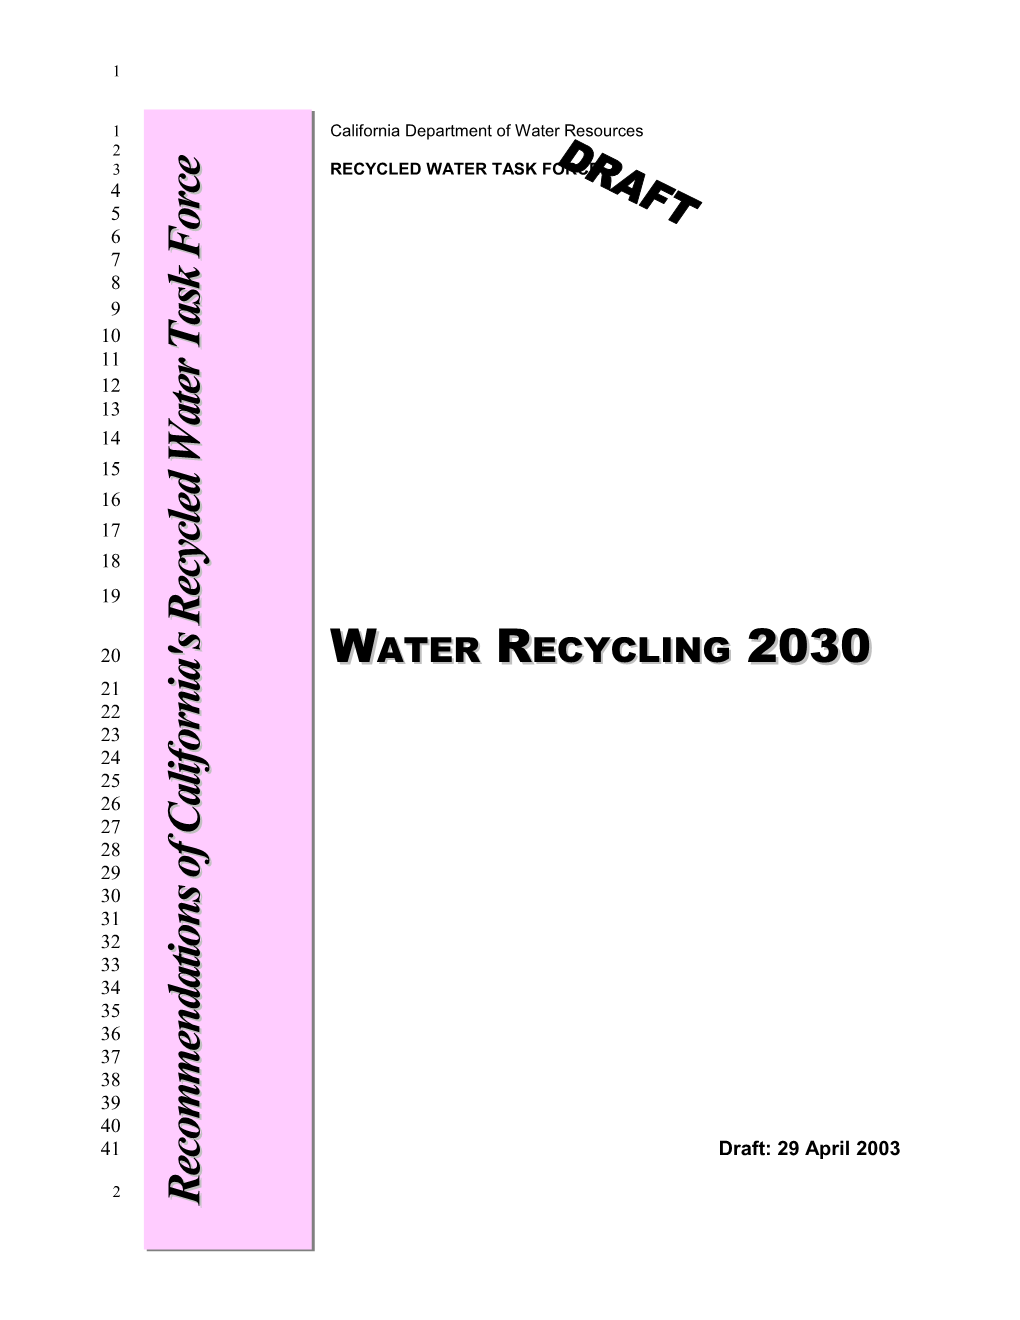 2002 Recycled Water Task Force Final Report